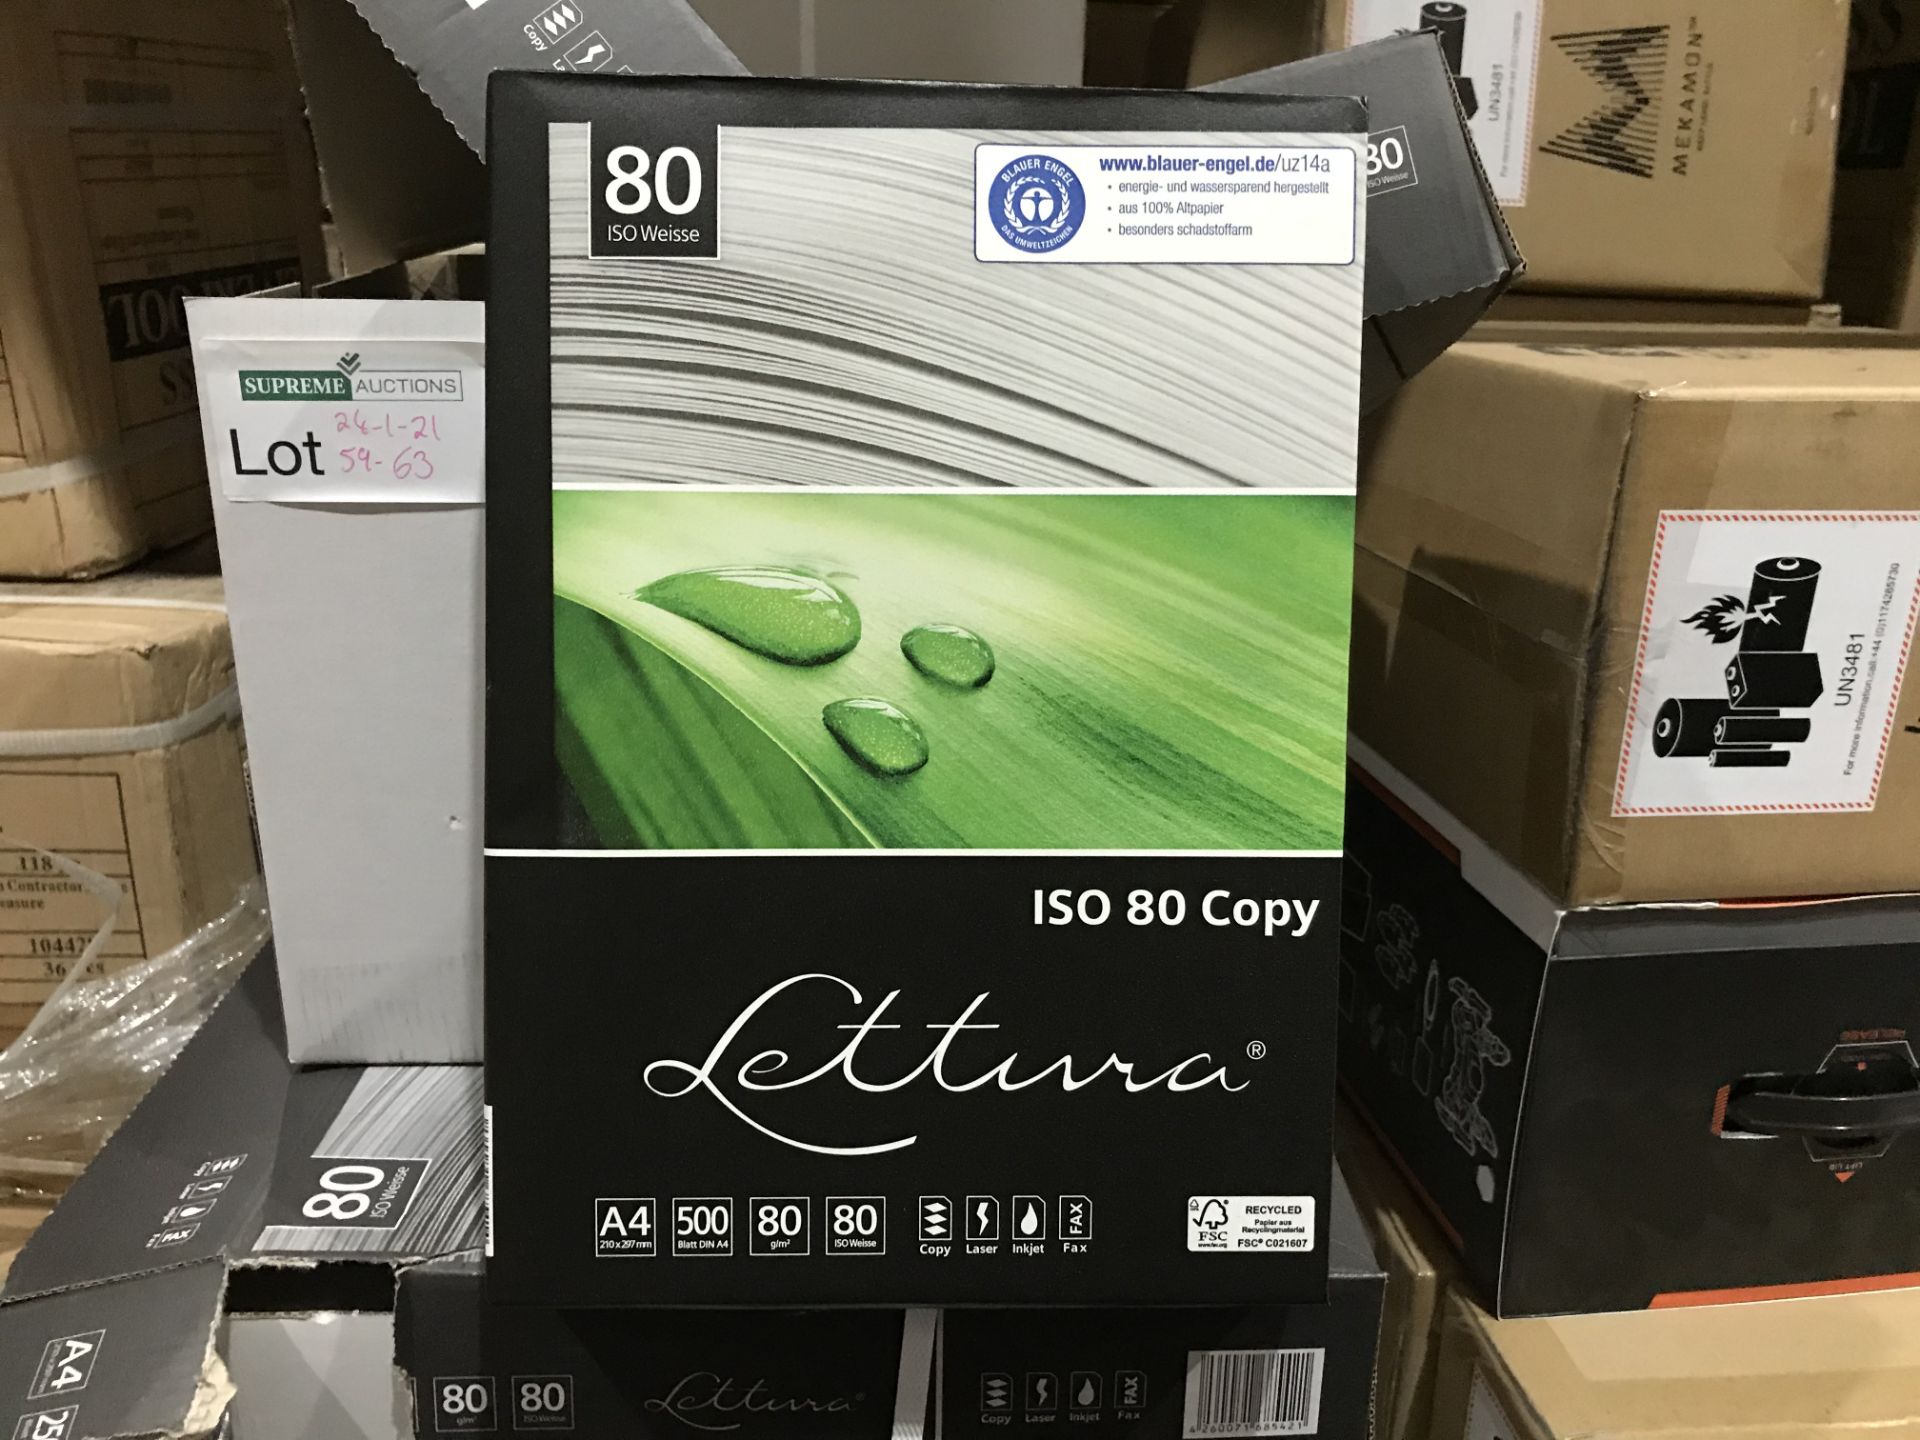 10 X PACKS OF 500 A4 PAPER IN 2 BOXES